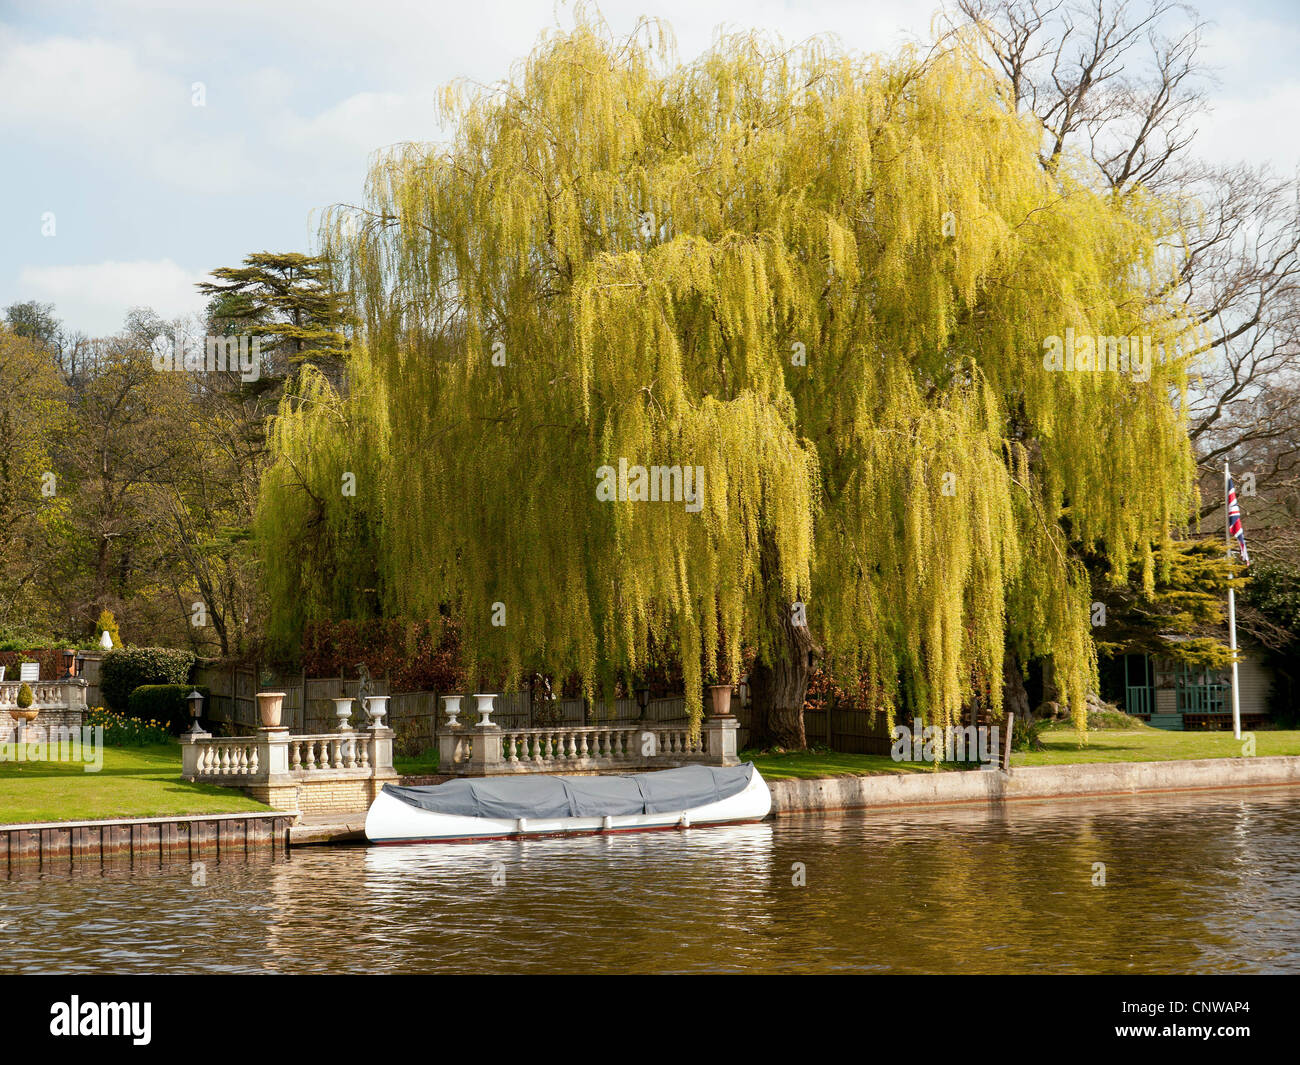 Picturesque waterside garden with moored boat by a weeping willow tree on the River Thames, Oxfordshire, UK Stock Photo